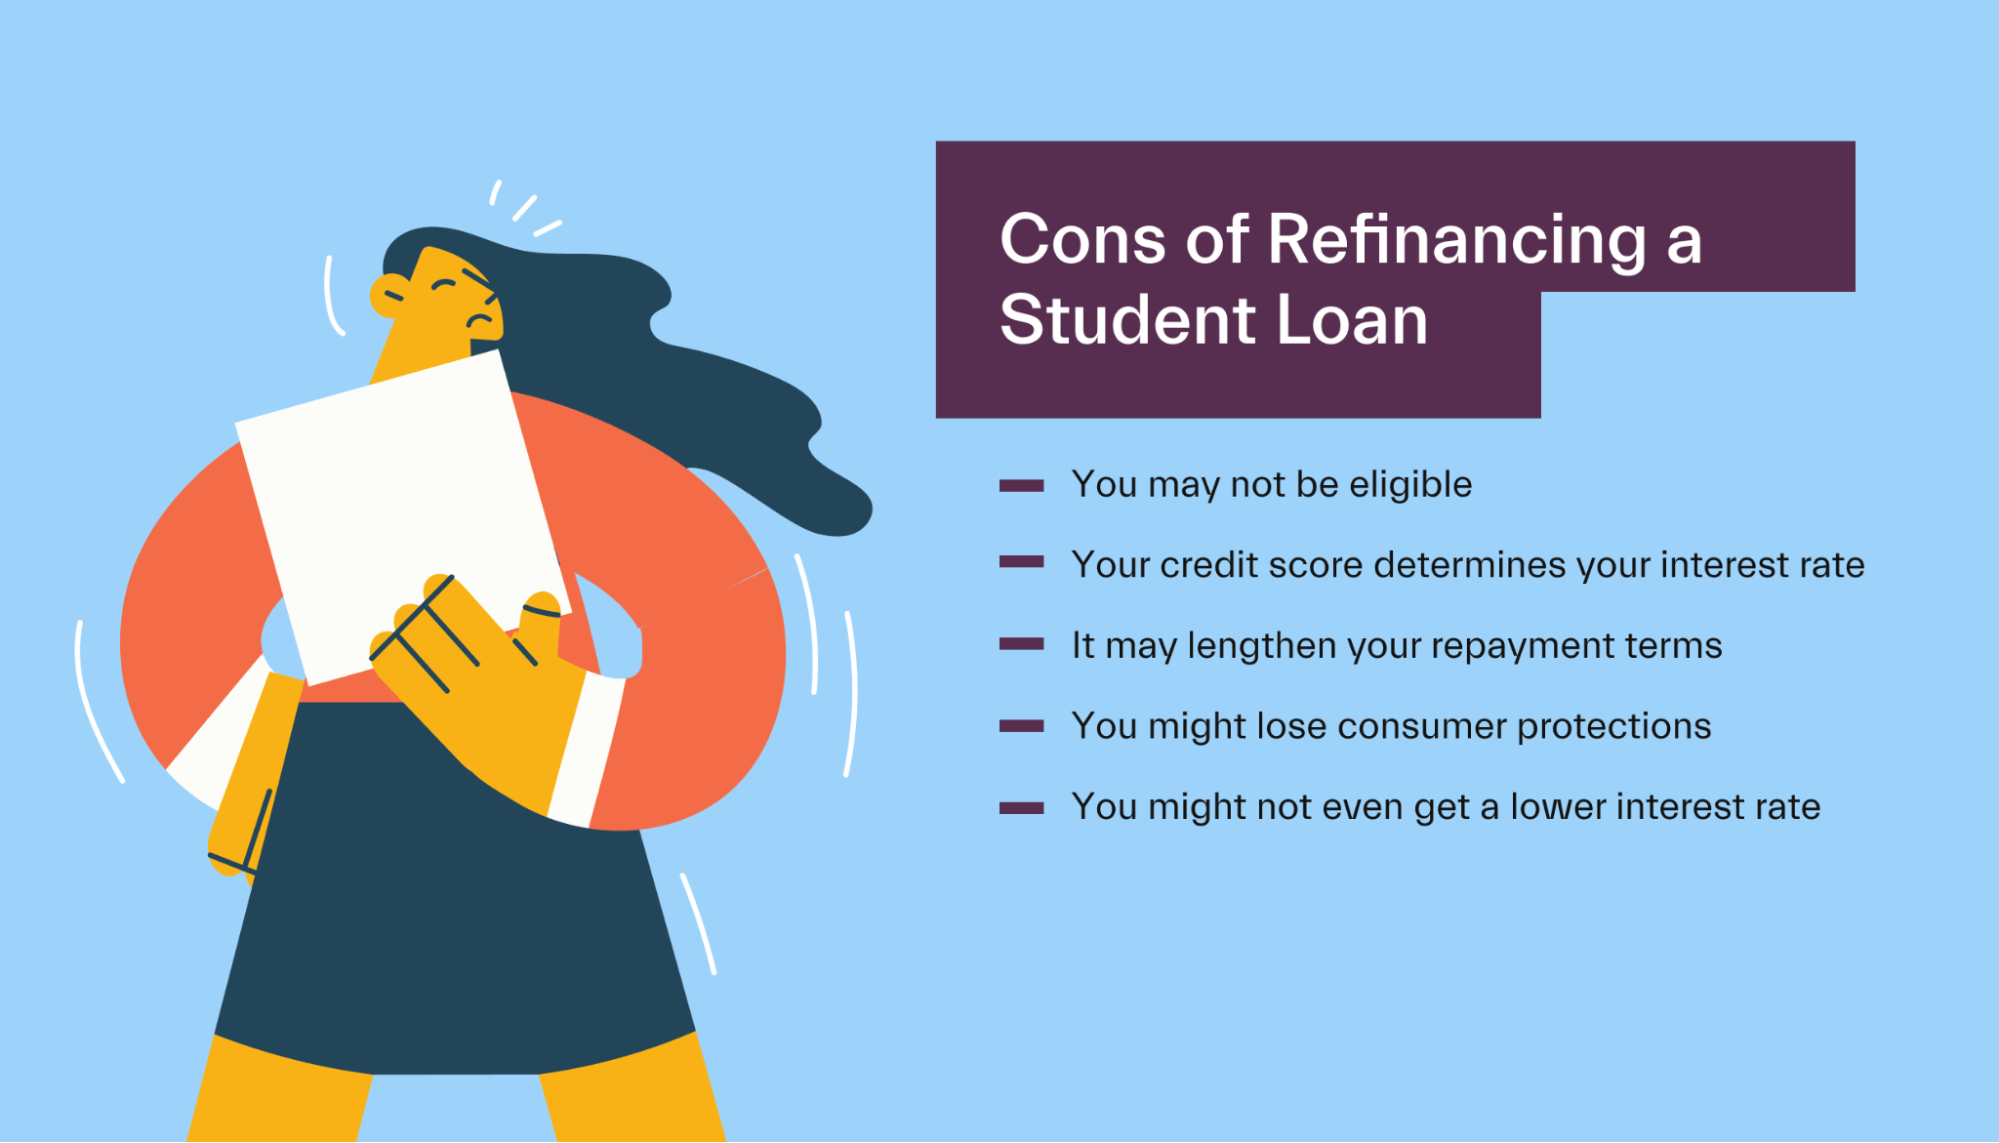 Cons of refinancing student loan